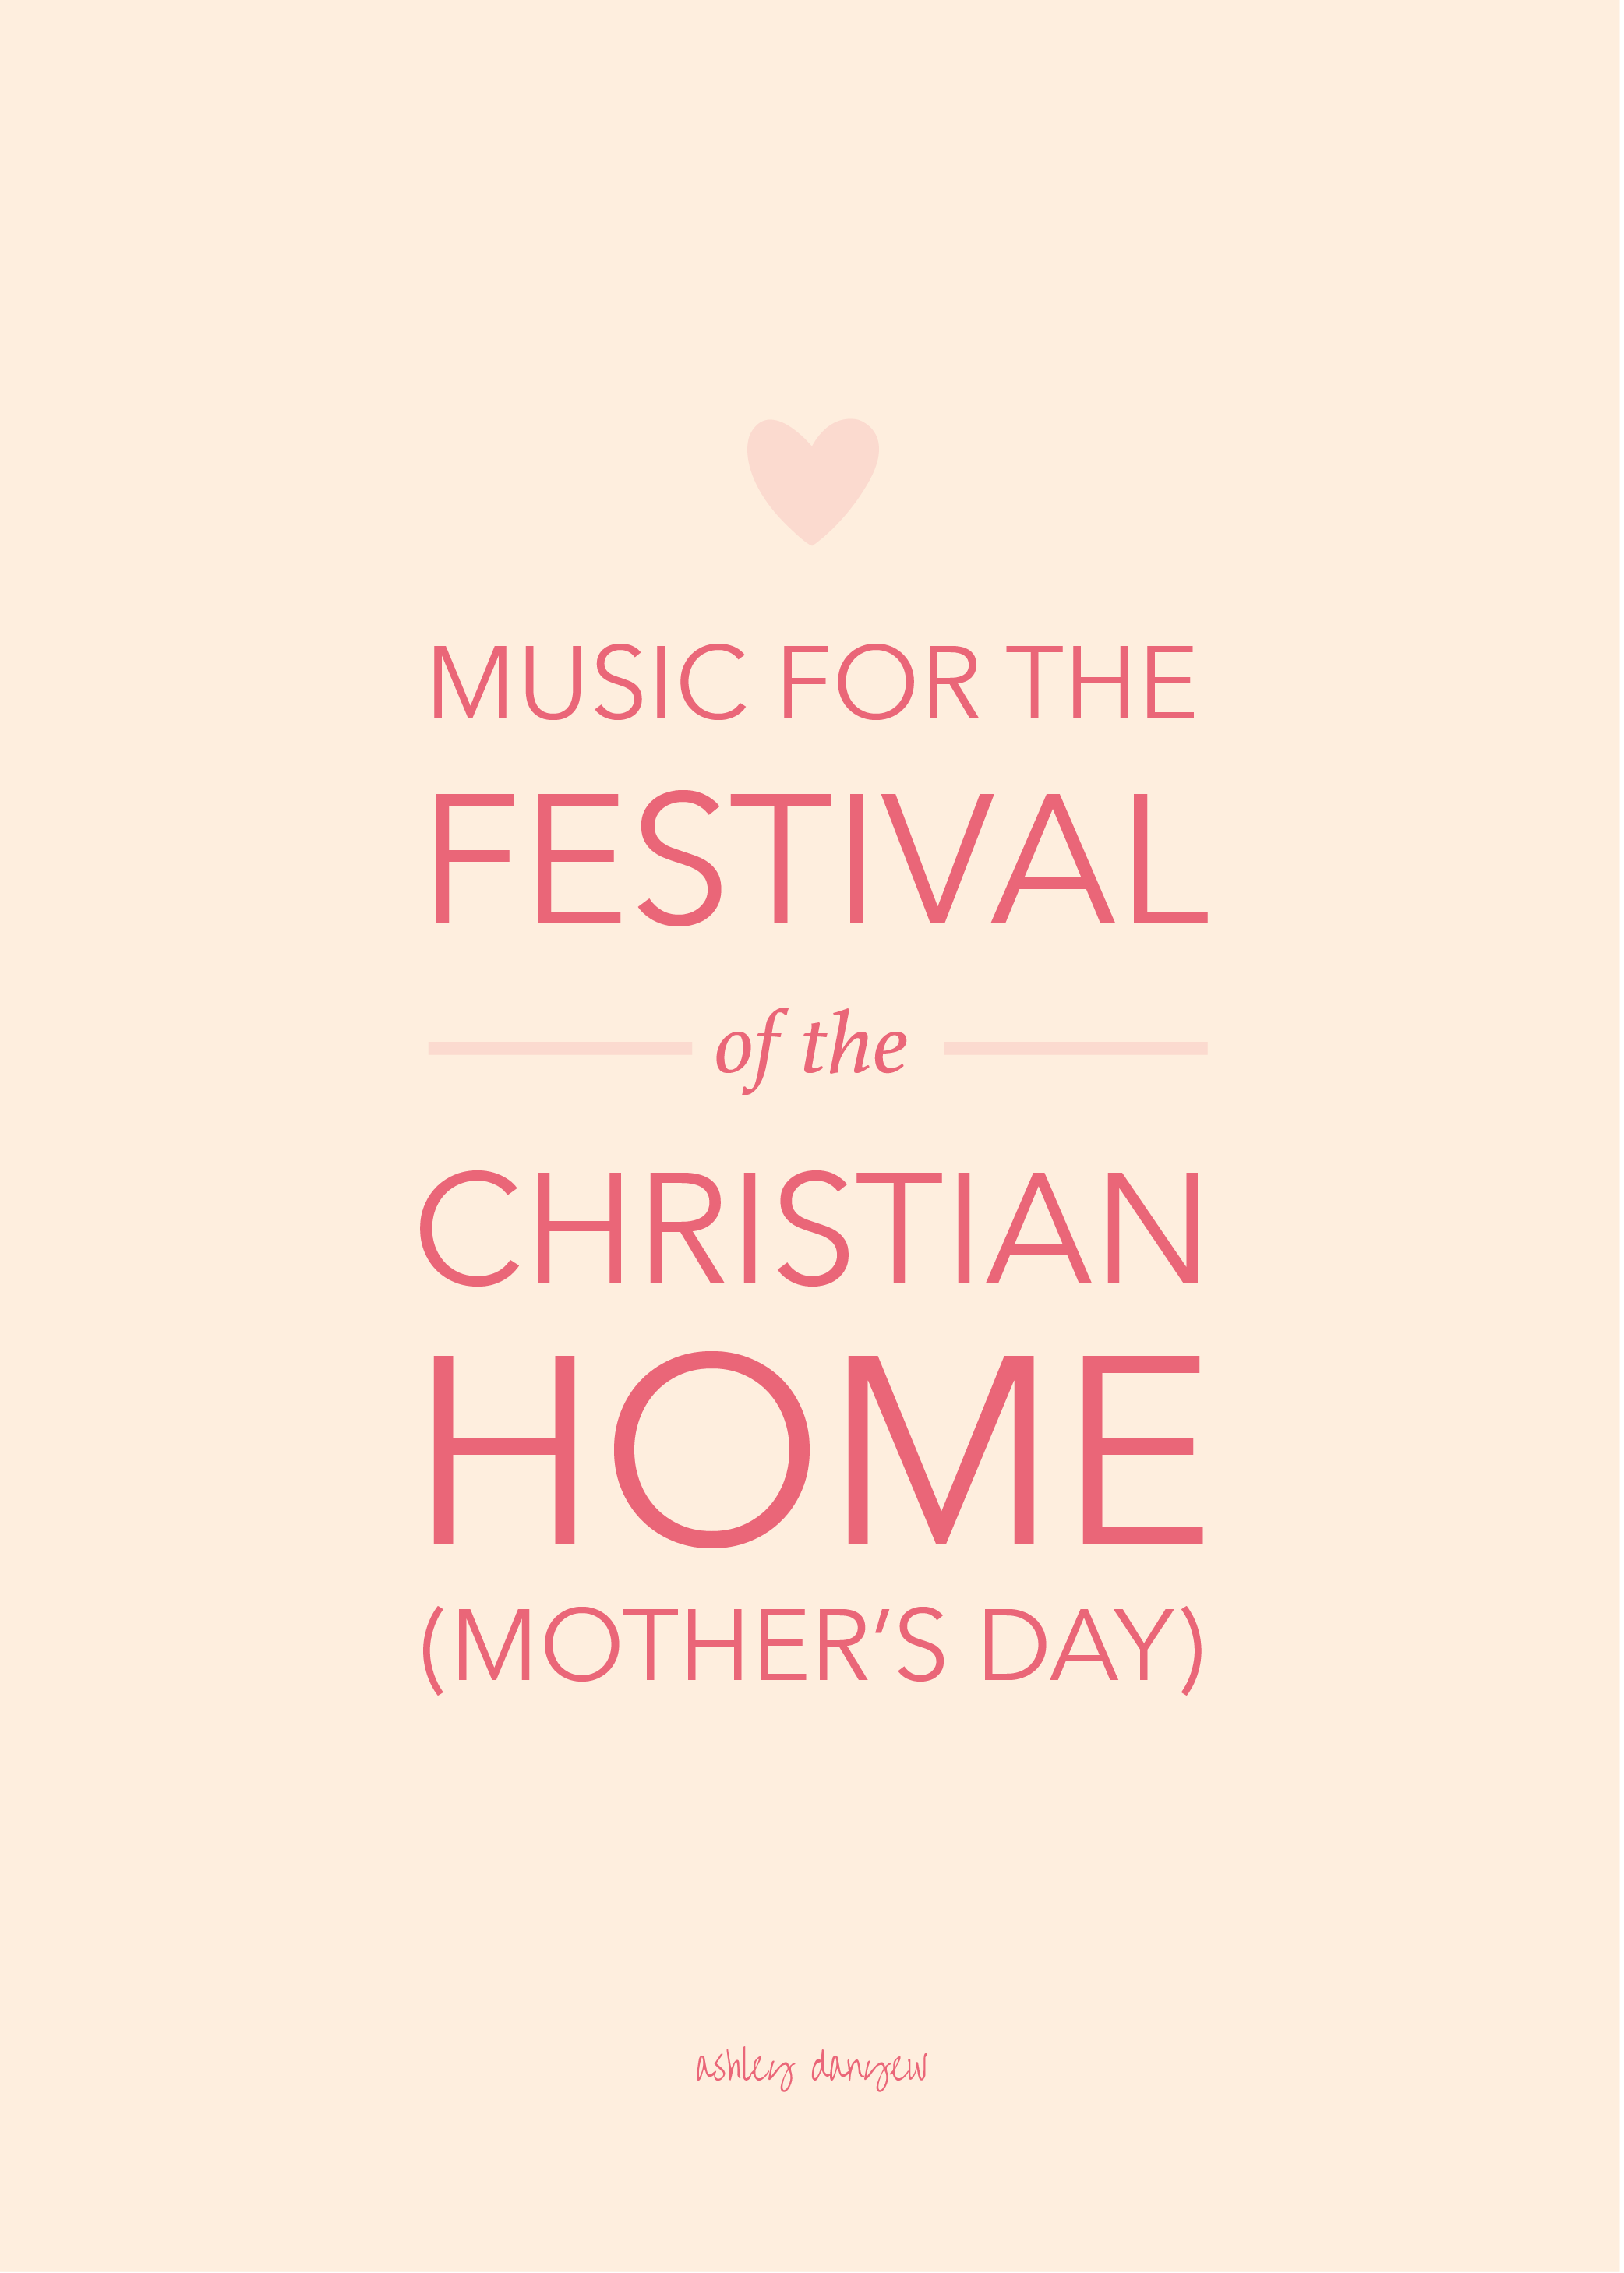 Music for the Festival of the Christian Home (Mother's Day)